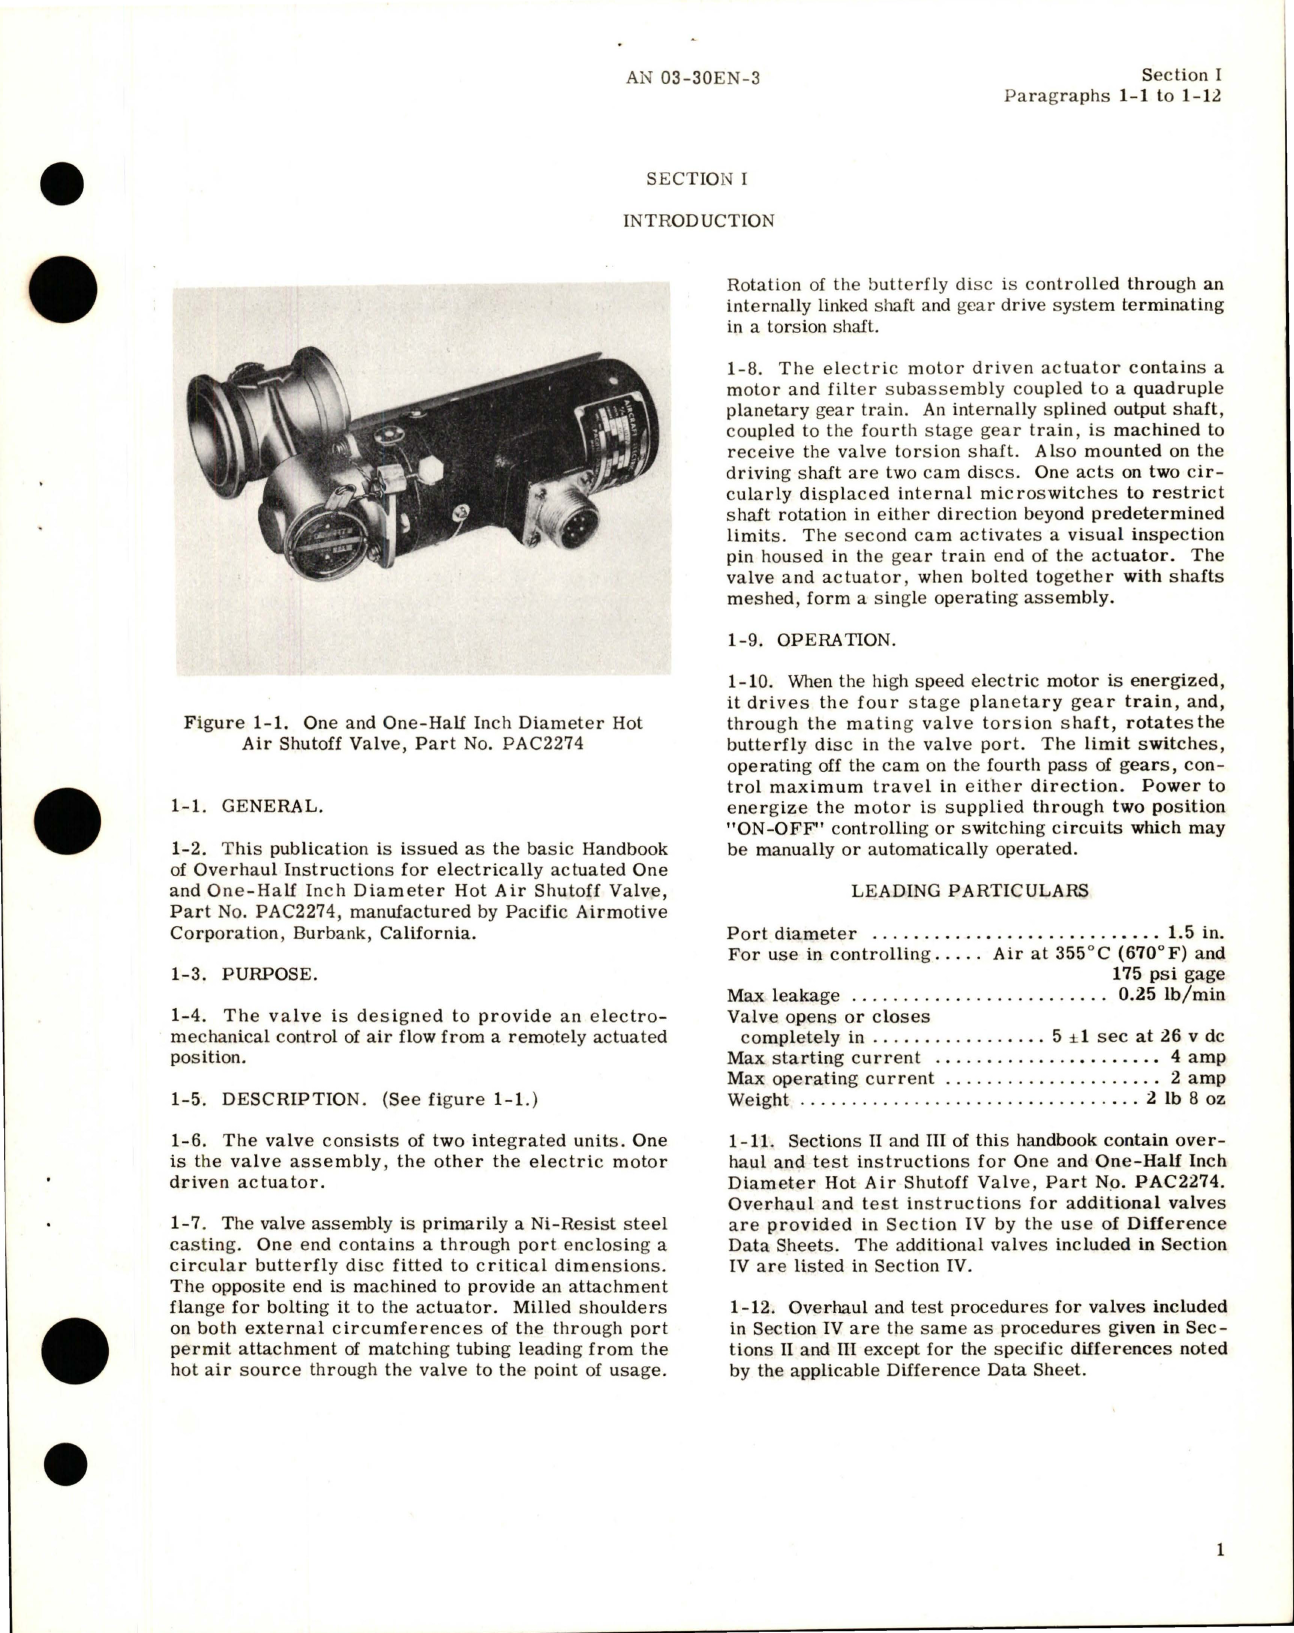 Sample page 5 from AirCorps Library document: Overhaul Instructions for Hot Air Shutoff Valves - Parts PAC 2274, PAC 2275, PAC 2279, PAC 2279-1, and PAC 3022